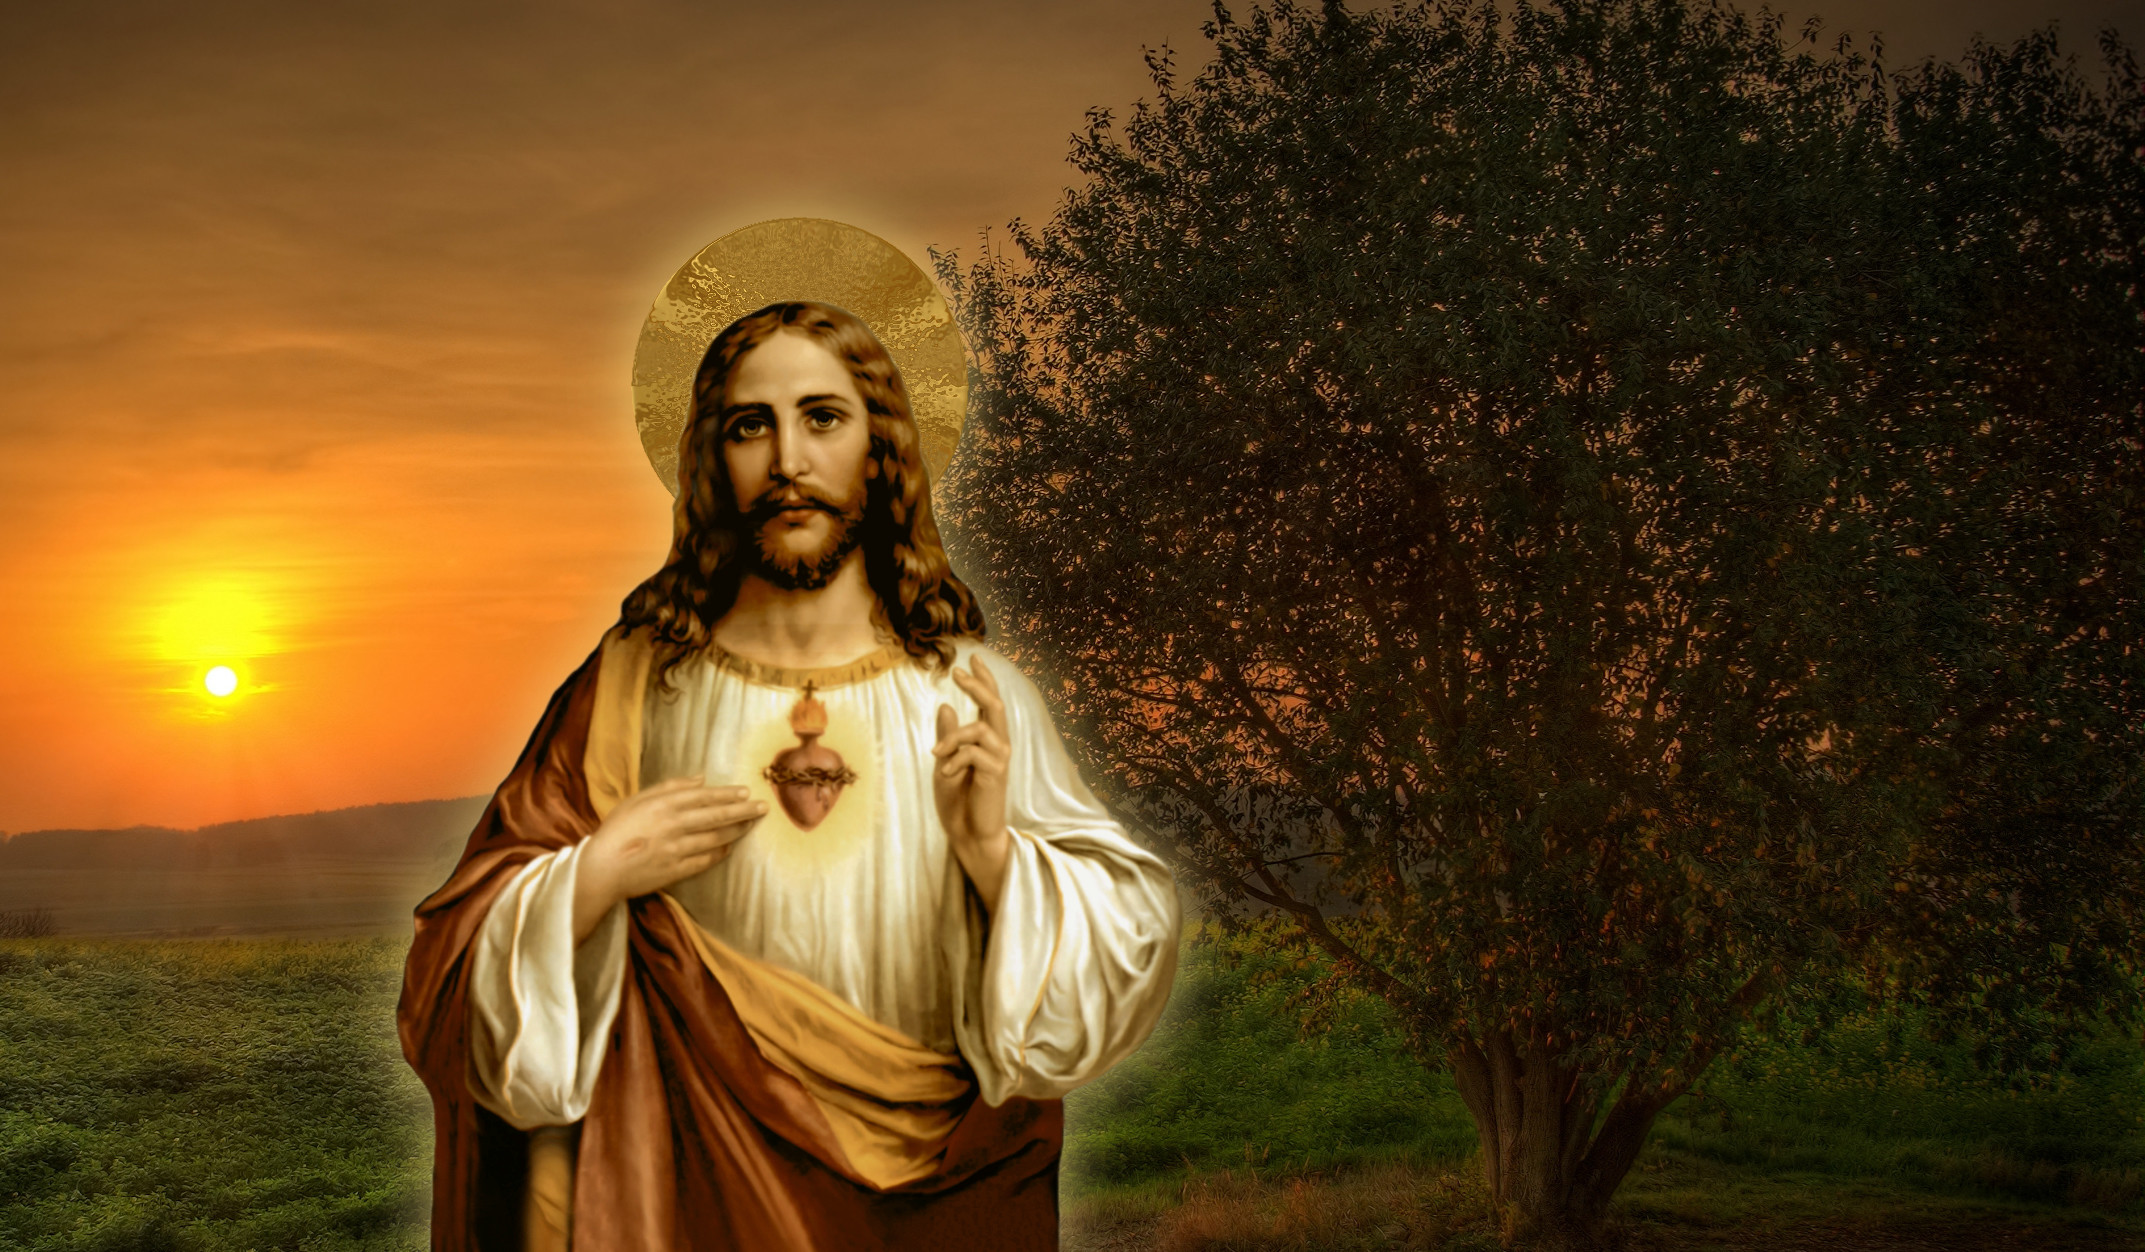 2145x1252 DOWNLOAD THE SACRED HEART WALLPAPER FOR PERSONAL USE ONLY